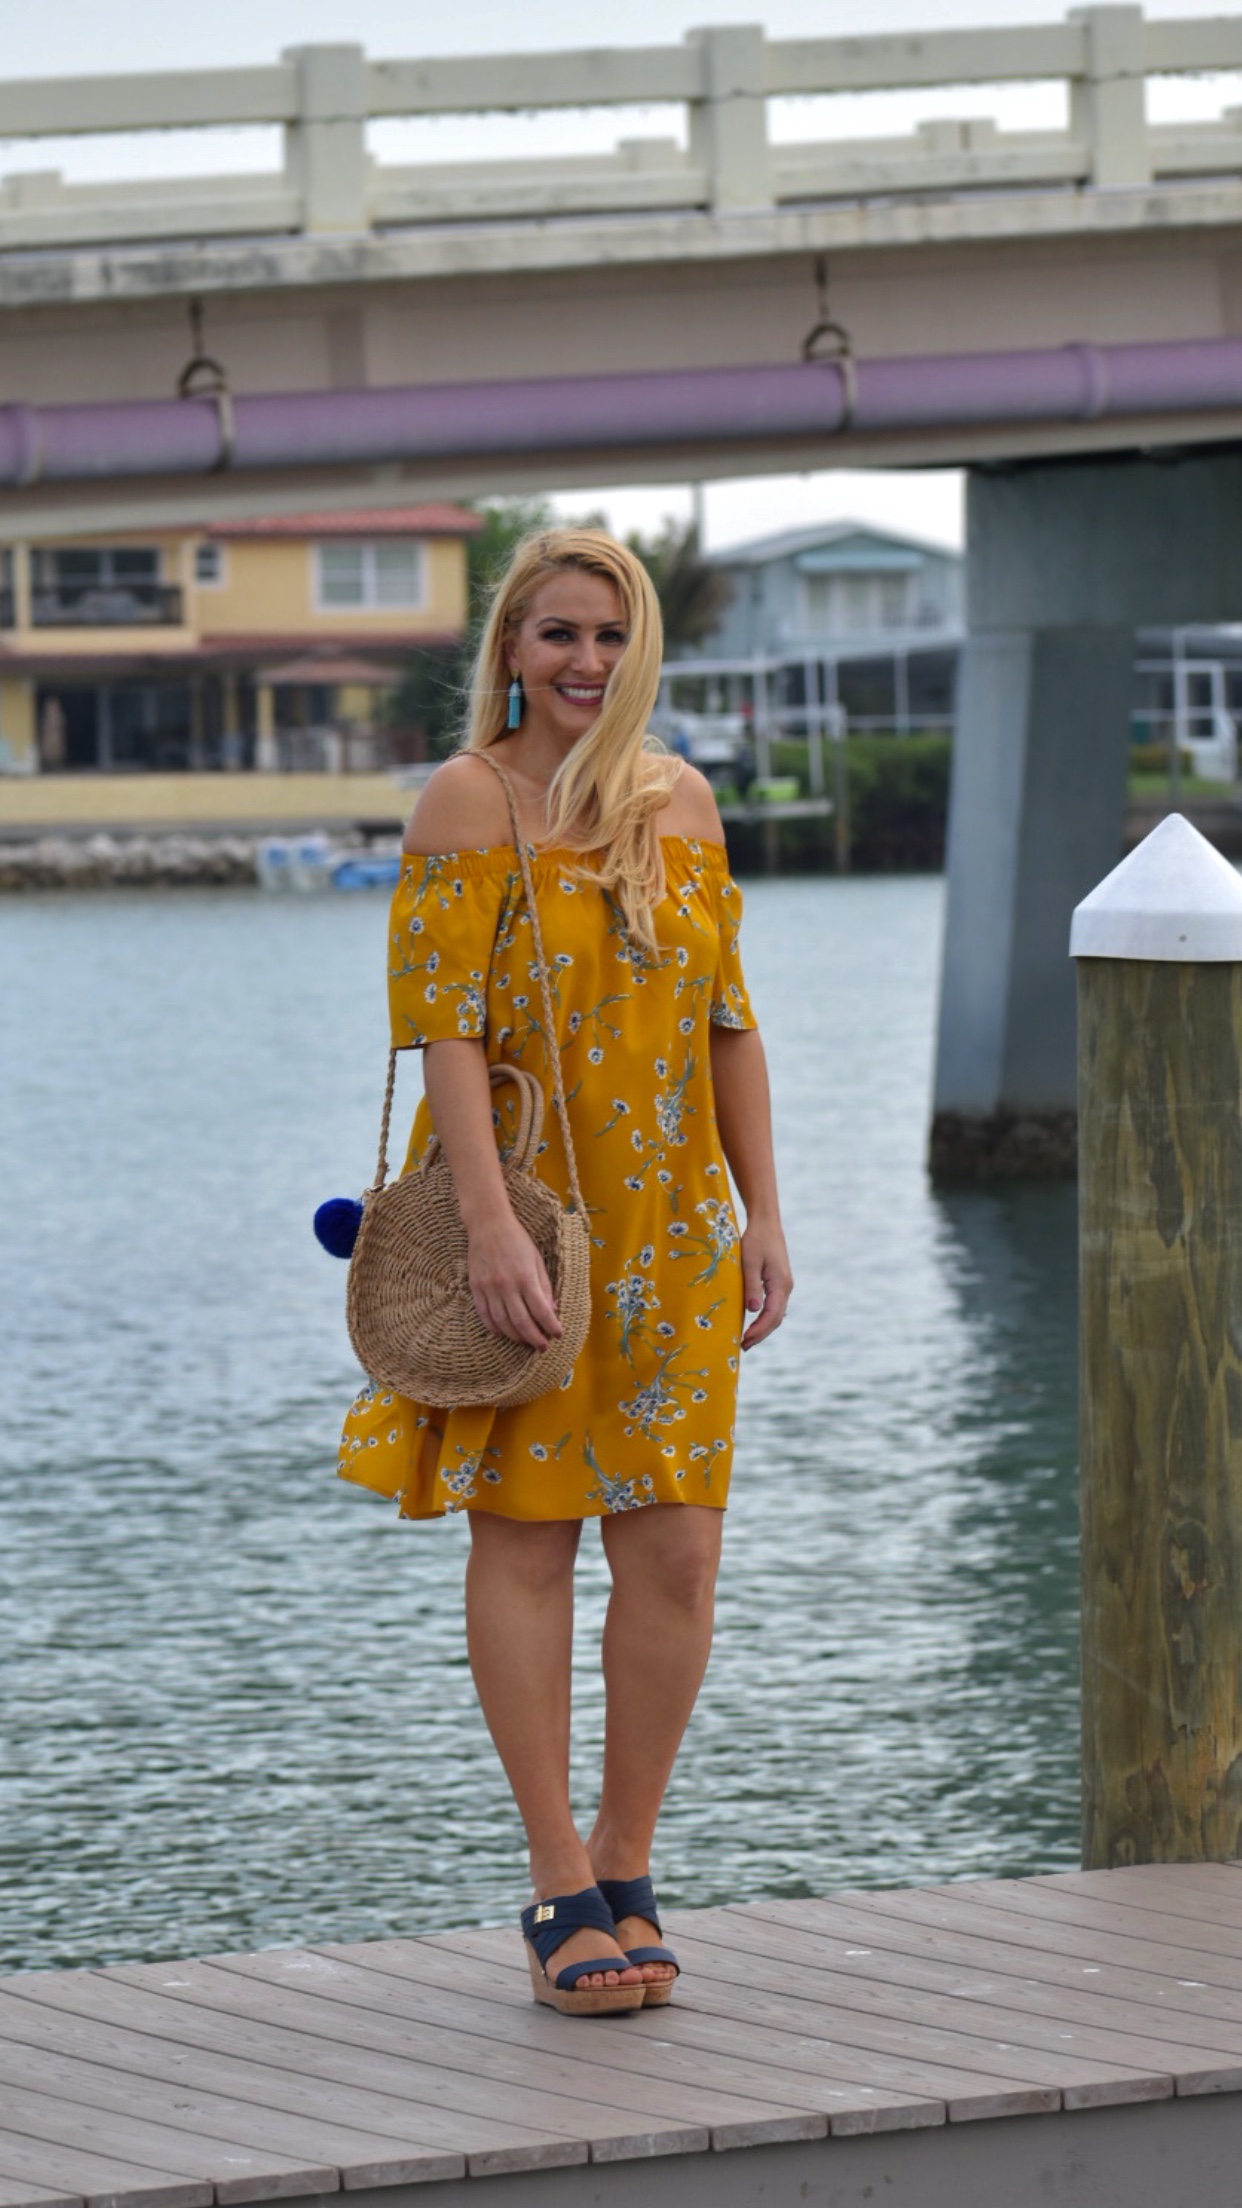 Yellow Outfits, Off The Shoulder Dress, Yellow Dress, Floral Dress, Off The Shoulder Floral Dress, Round Straw Handbag, Wedges